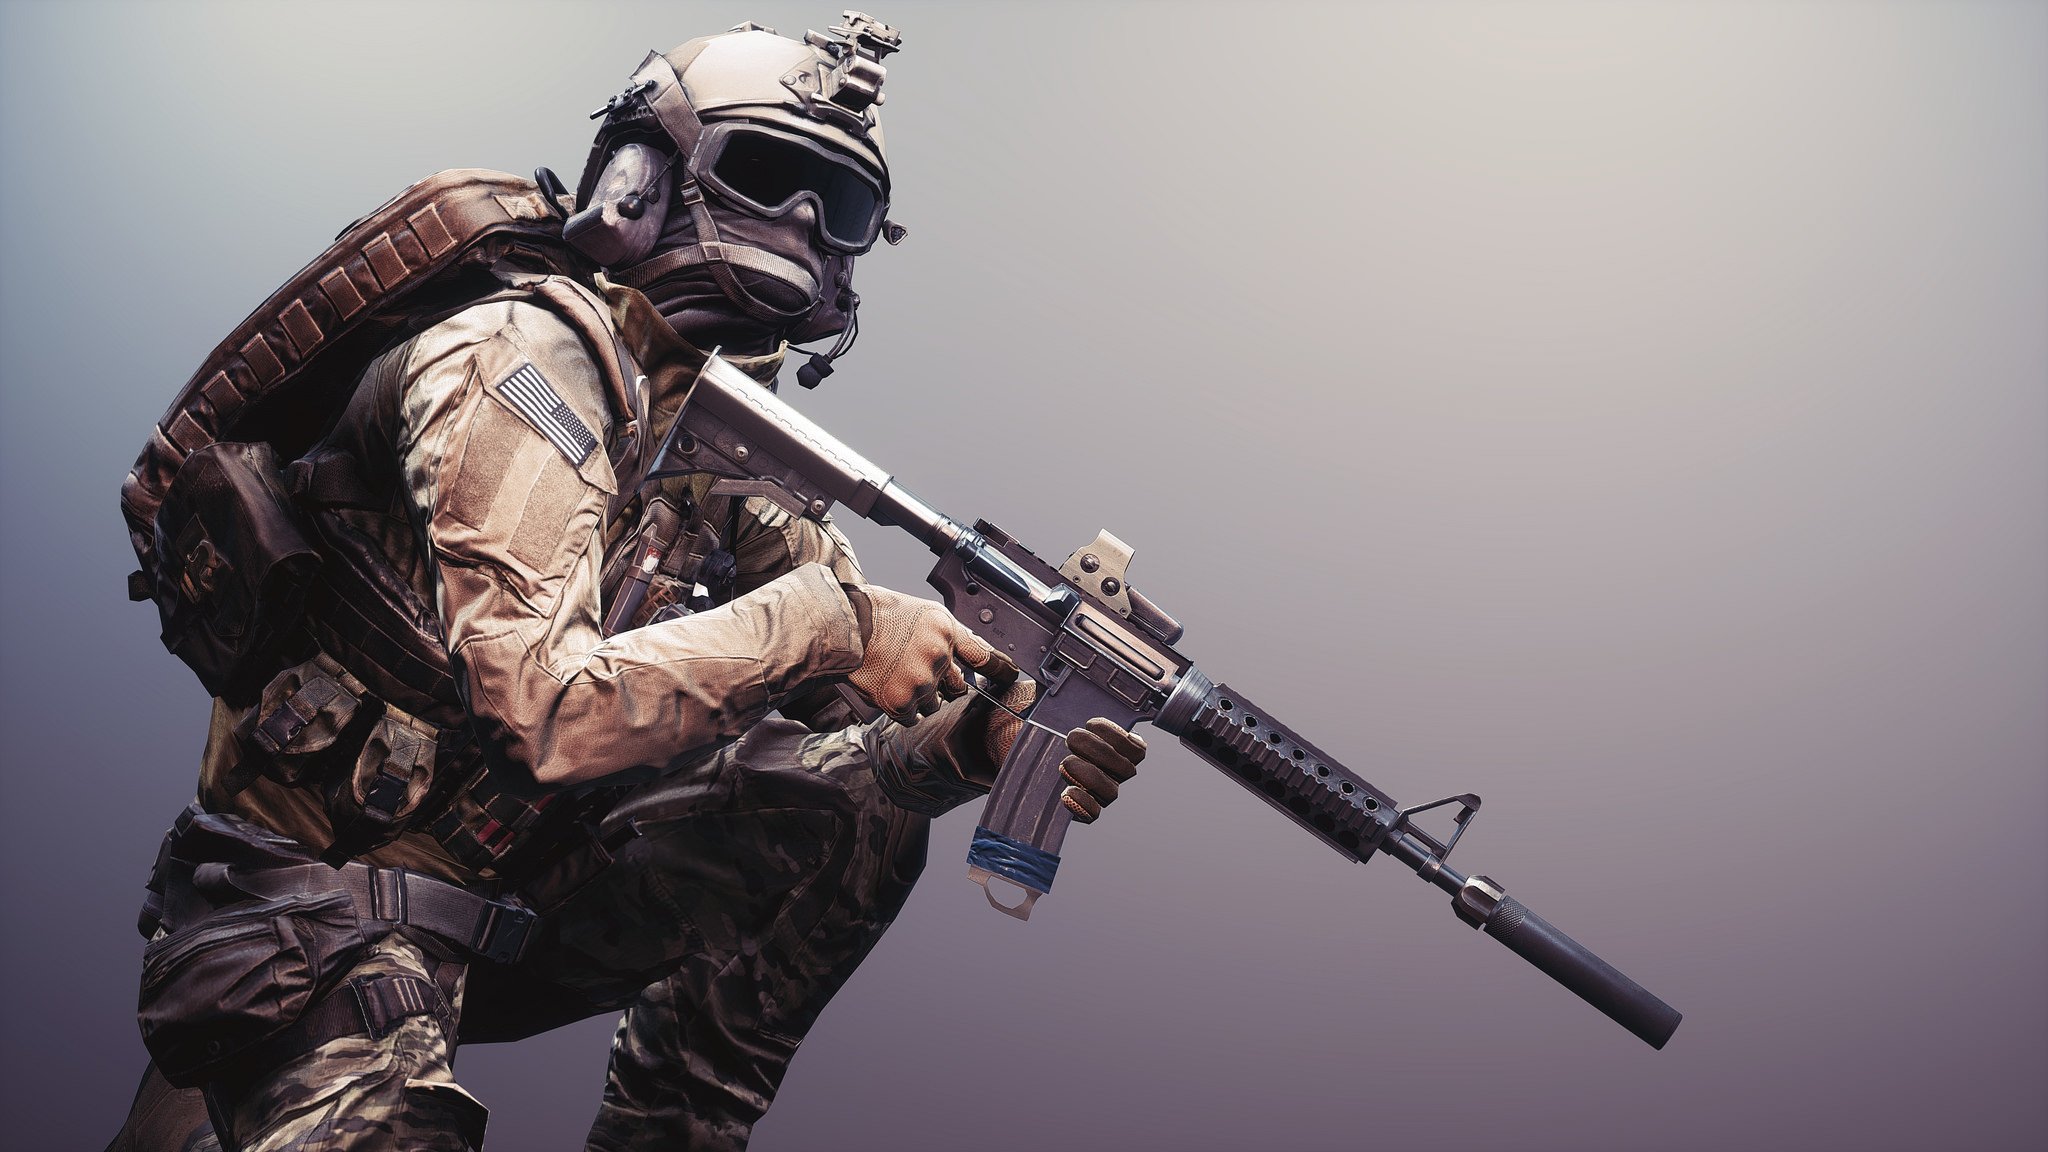 battlefield, Shooter, Tactical, Military, Action, Fighting, Warrior, Futuristic, Sci fi Wallpaper